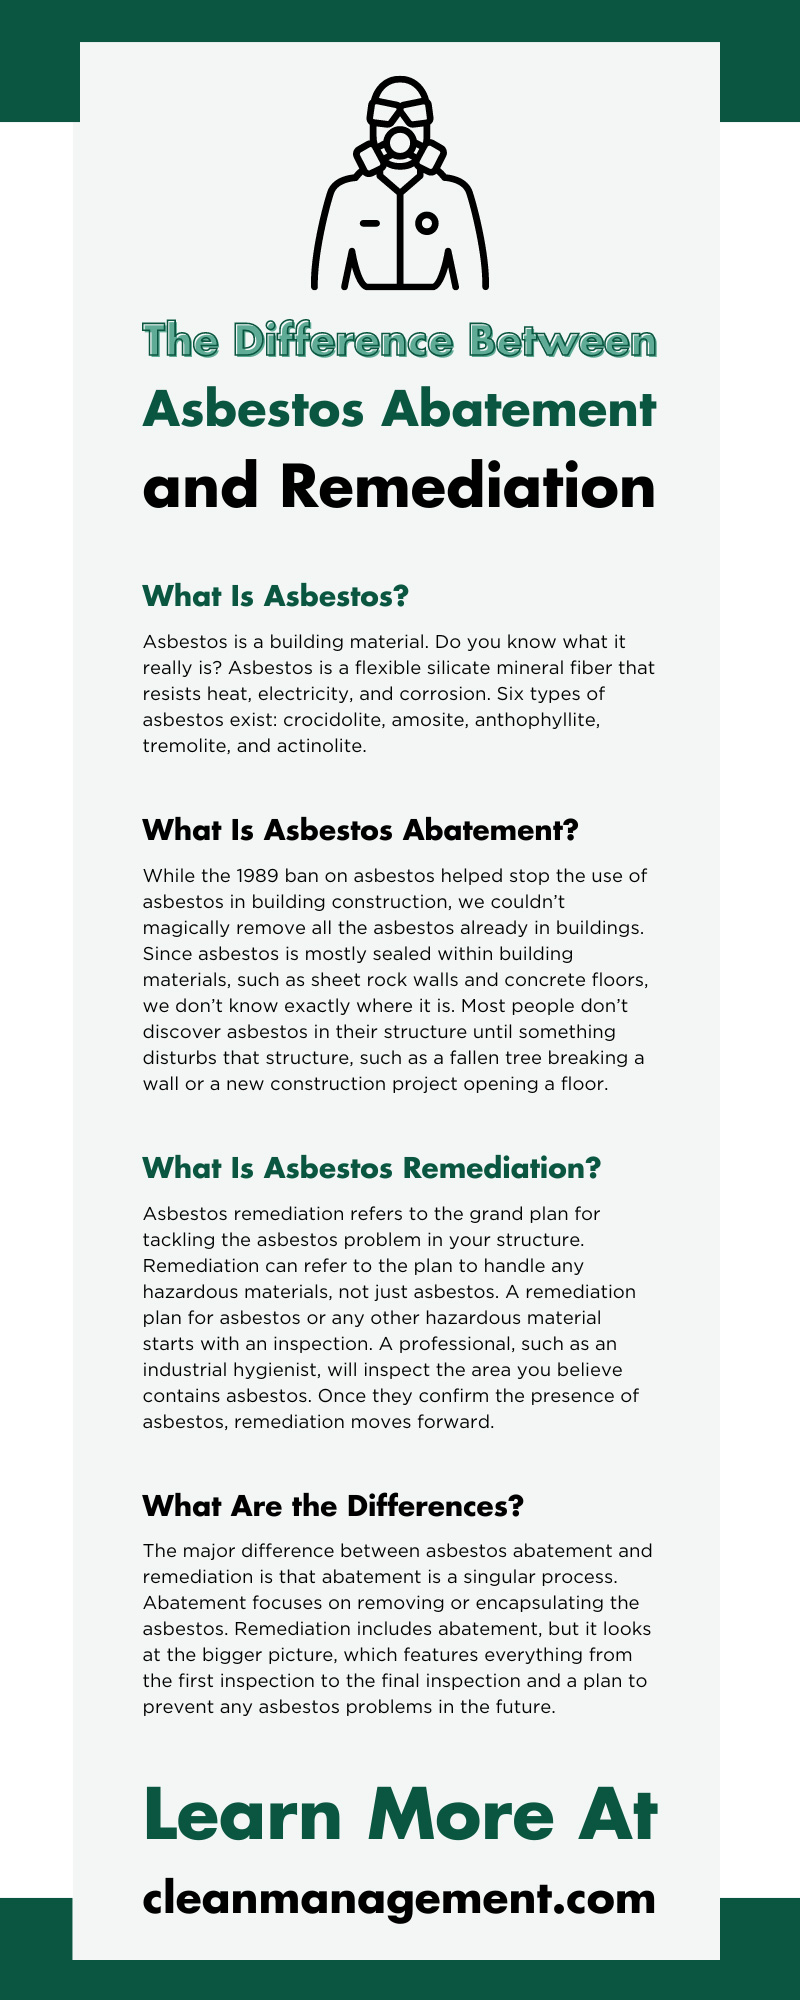 The Difference Between Asbestos Abatement and Remediation